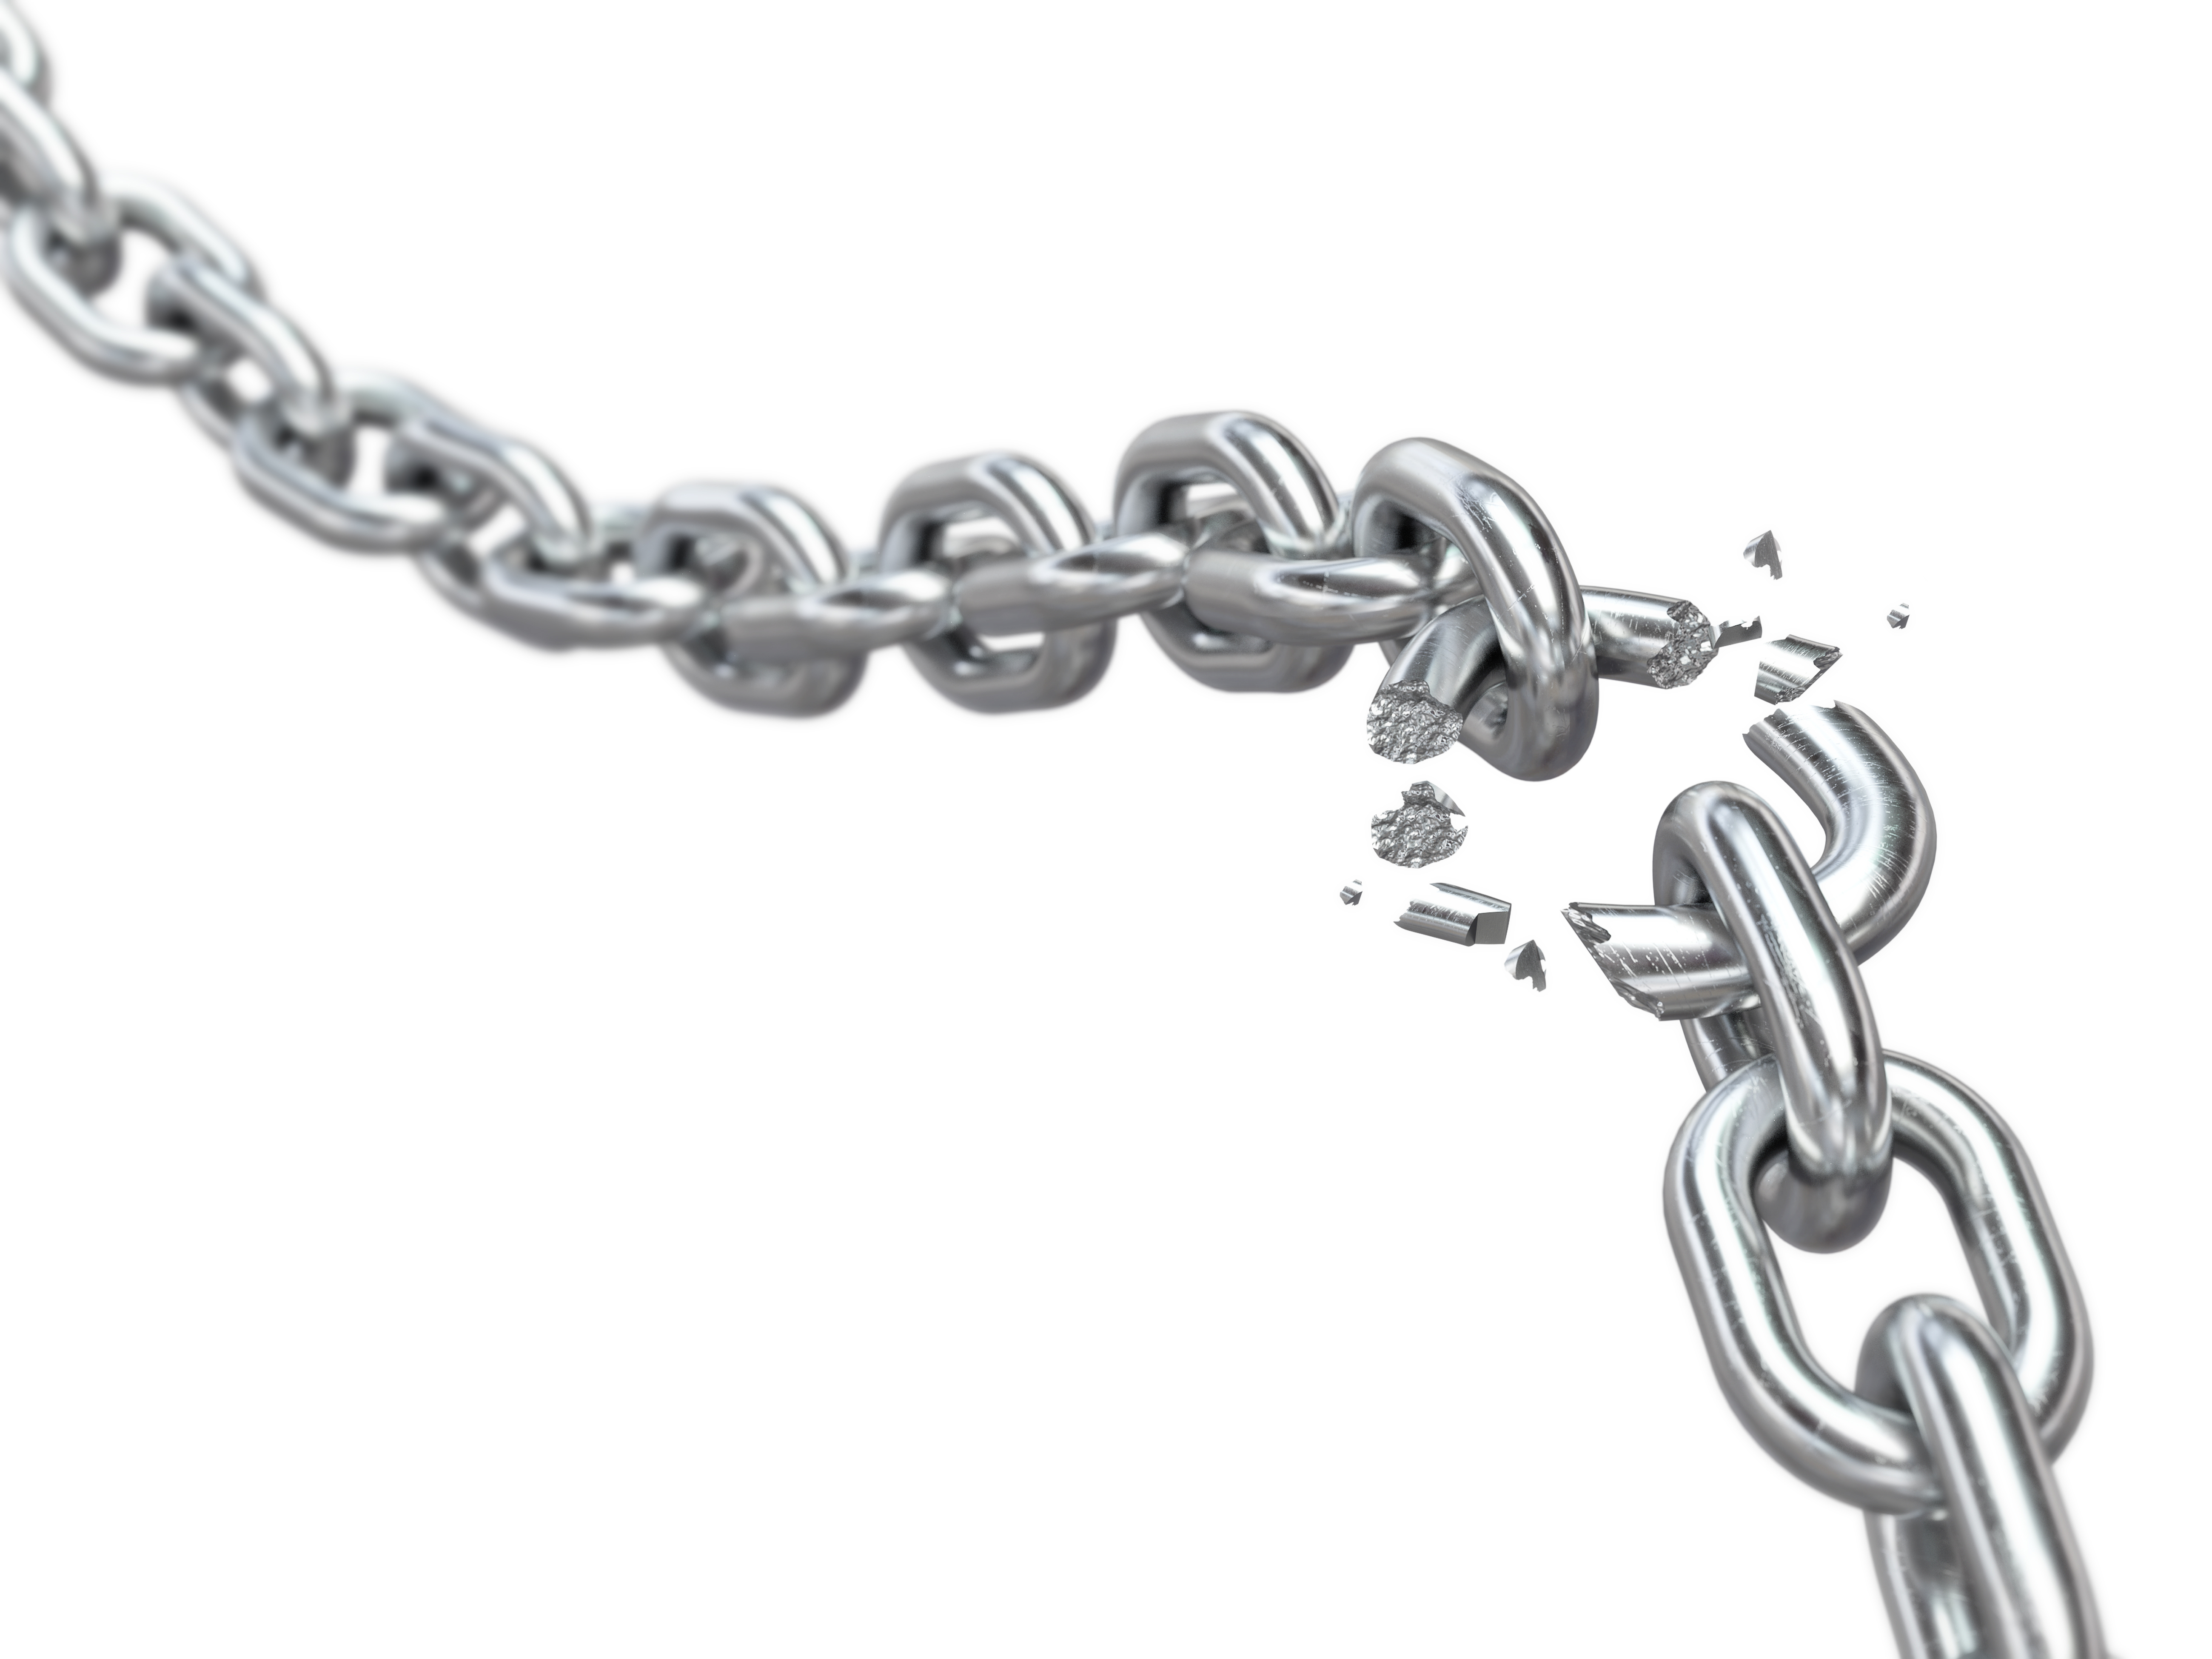 Broken Chains – Victory Call